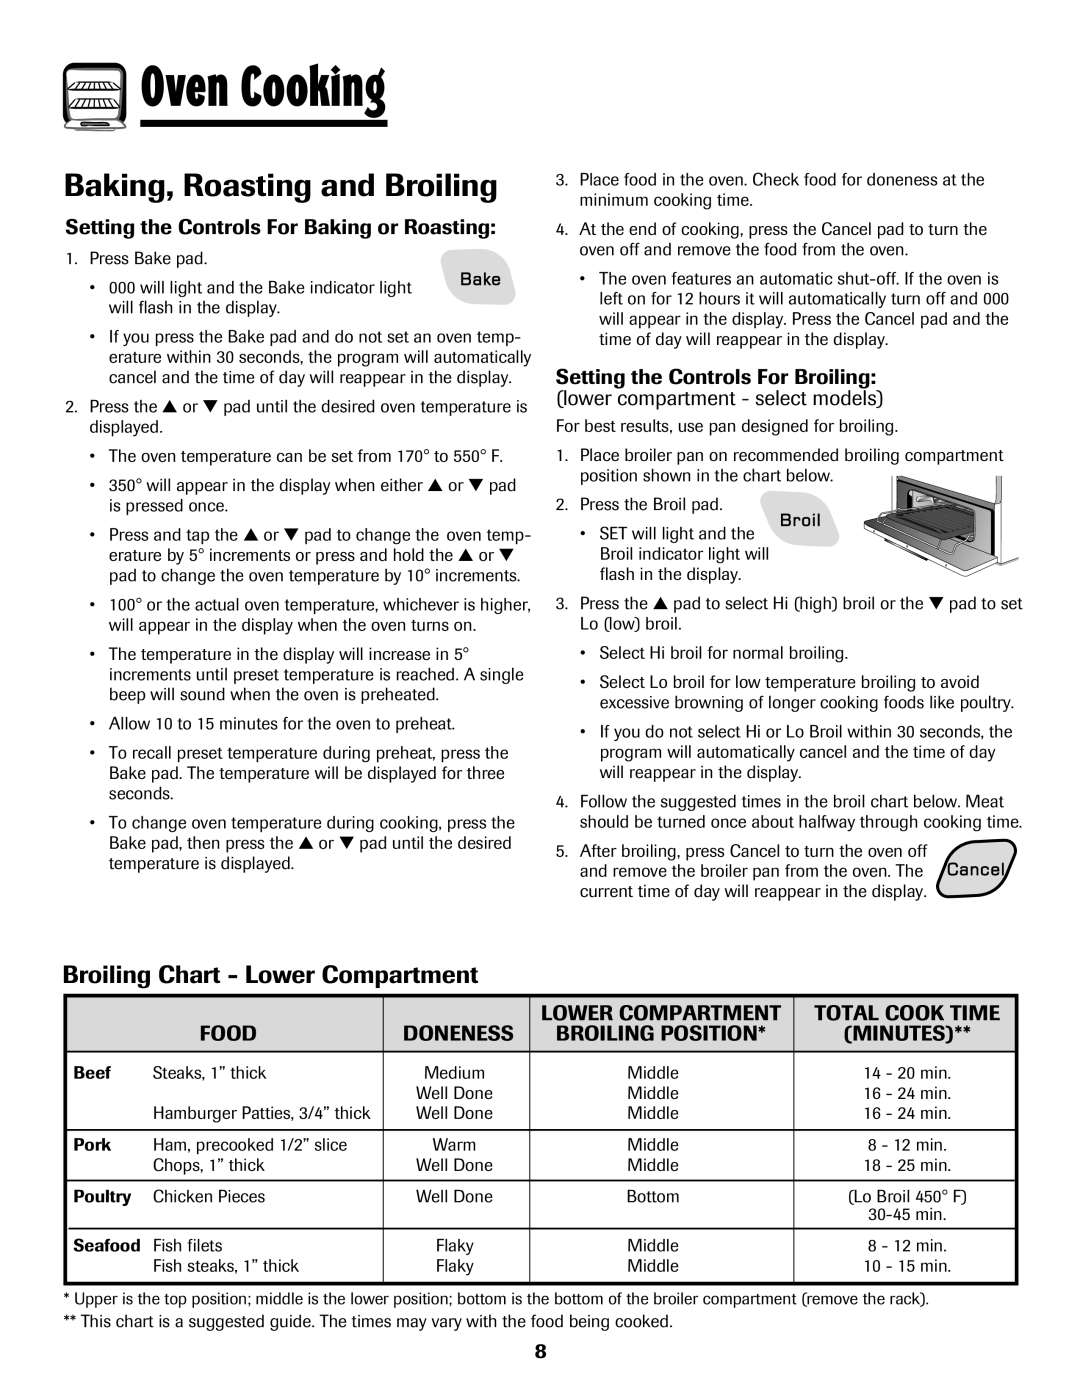 Amana pmn Baking, Roasting and Broiling, Broiling Chart - Lower Compartment, Setting the Controls For Baking or Roasting 